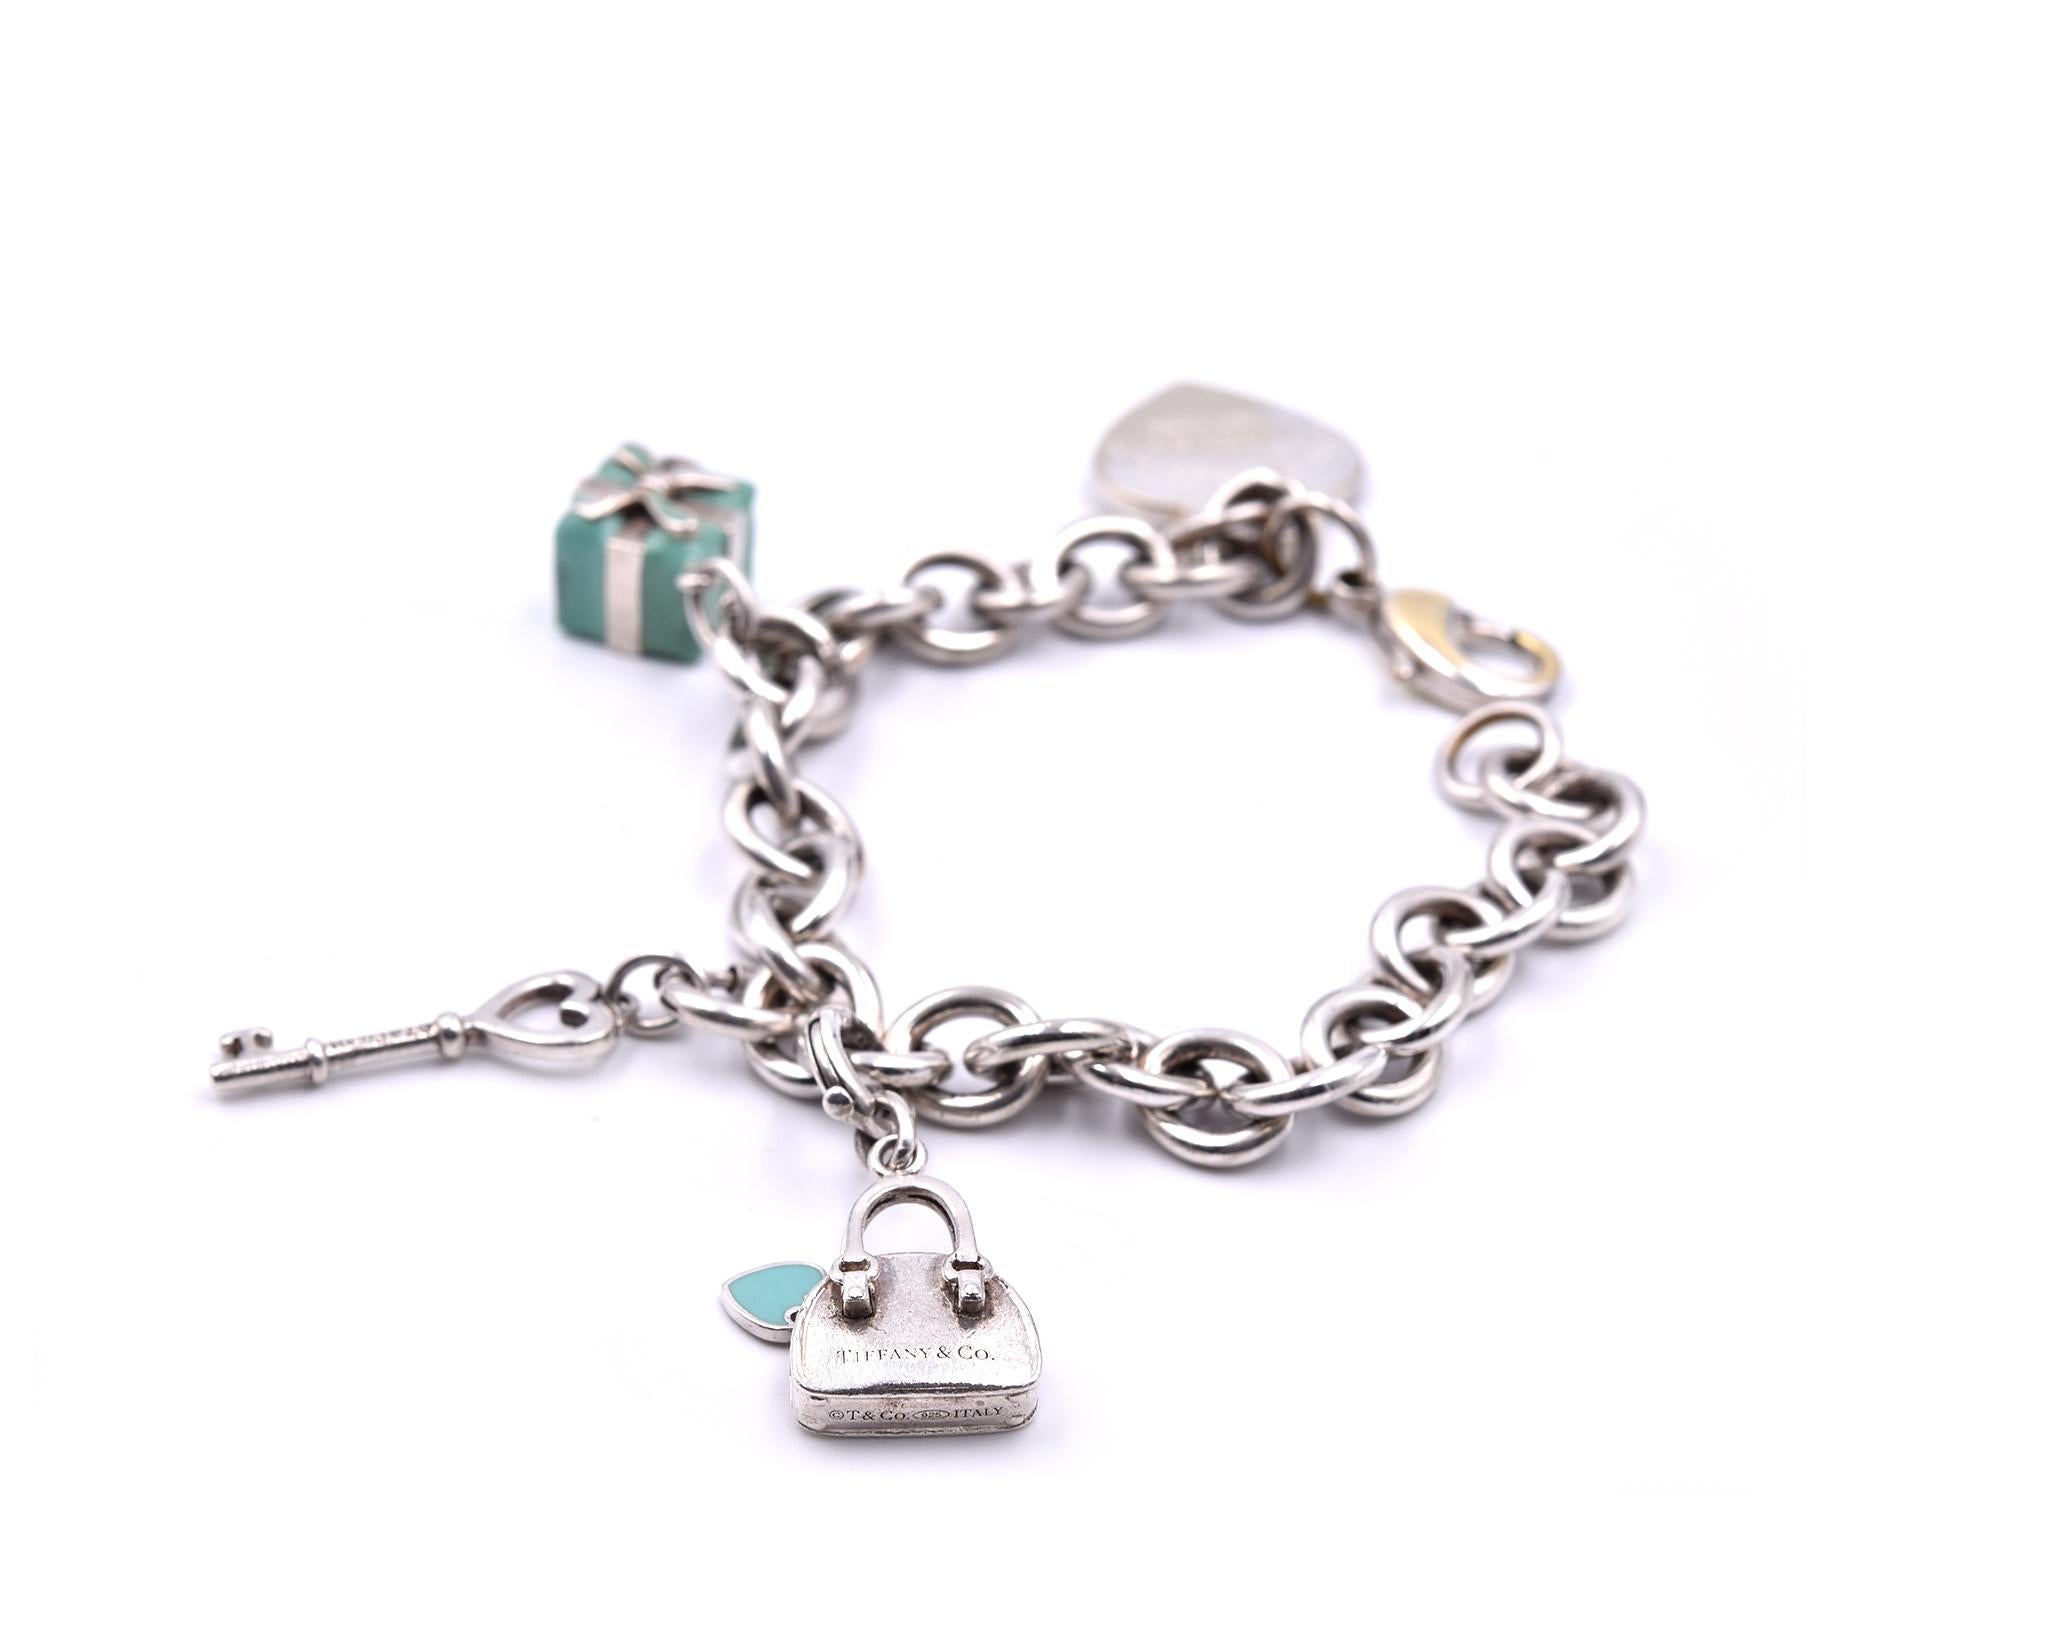 Designer: Tiffany & Co.
Material: sterling silver
Dimensions: bracelet is 8”-long 
Weight: 44.47 grams
Retail: $1,010
